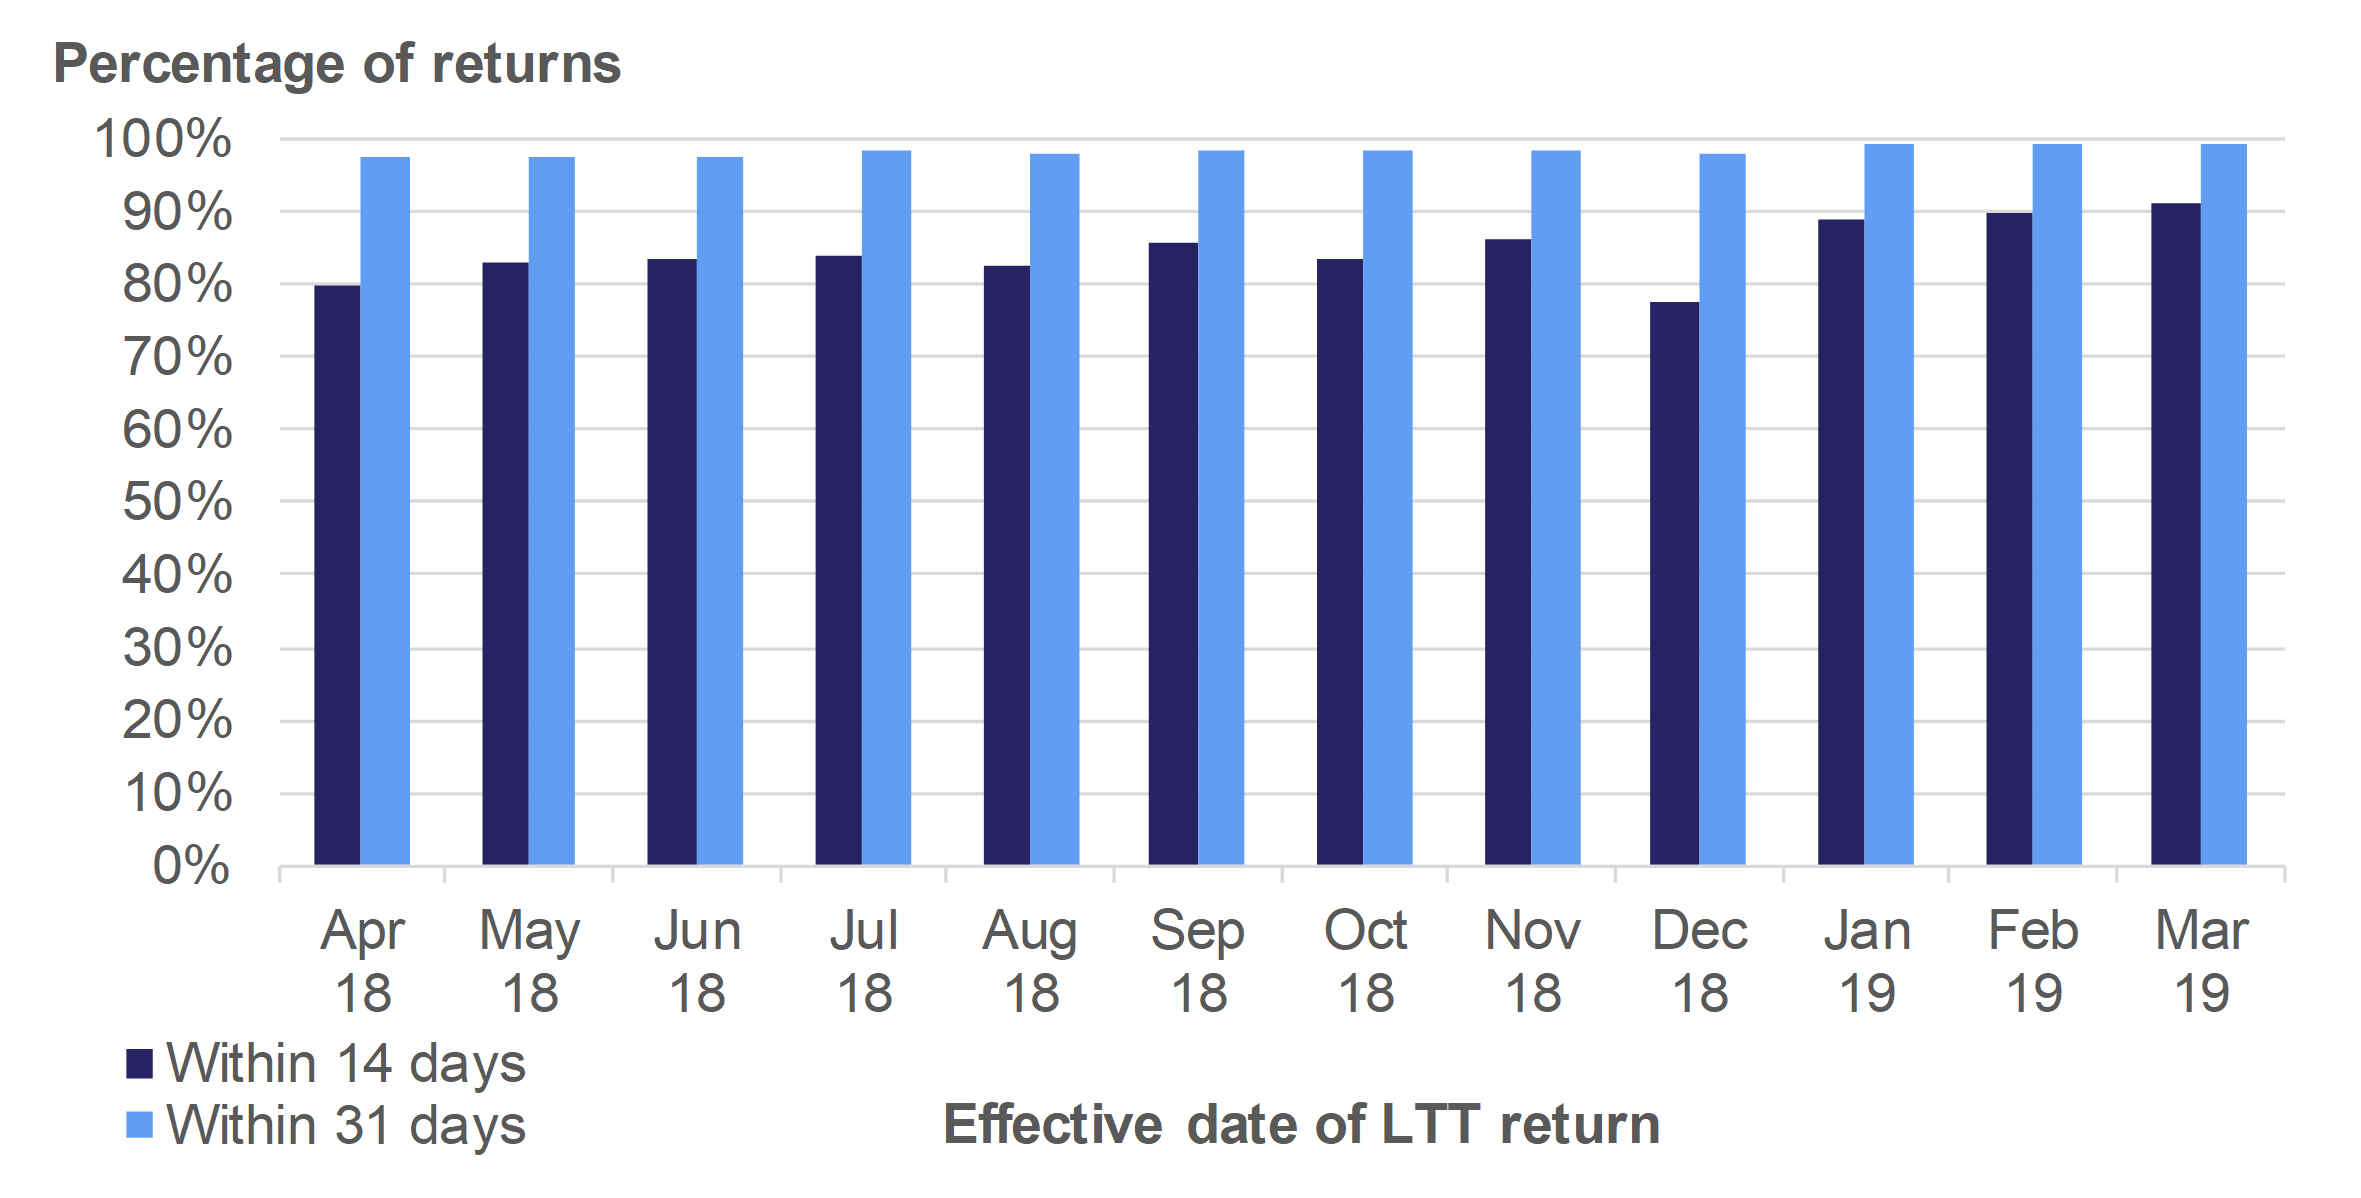 Figure 10.2 shows the monthly trends in the percentage of Land Transaction Tax returns received within 14 days and 31 days, for transactions effective in April 2018 to March 2019.